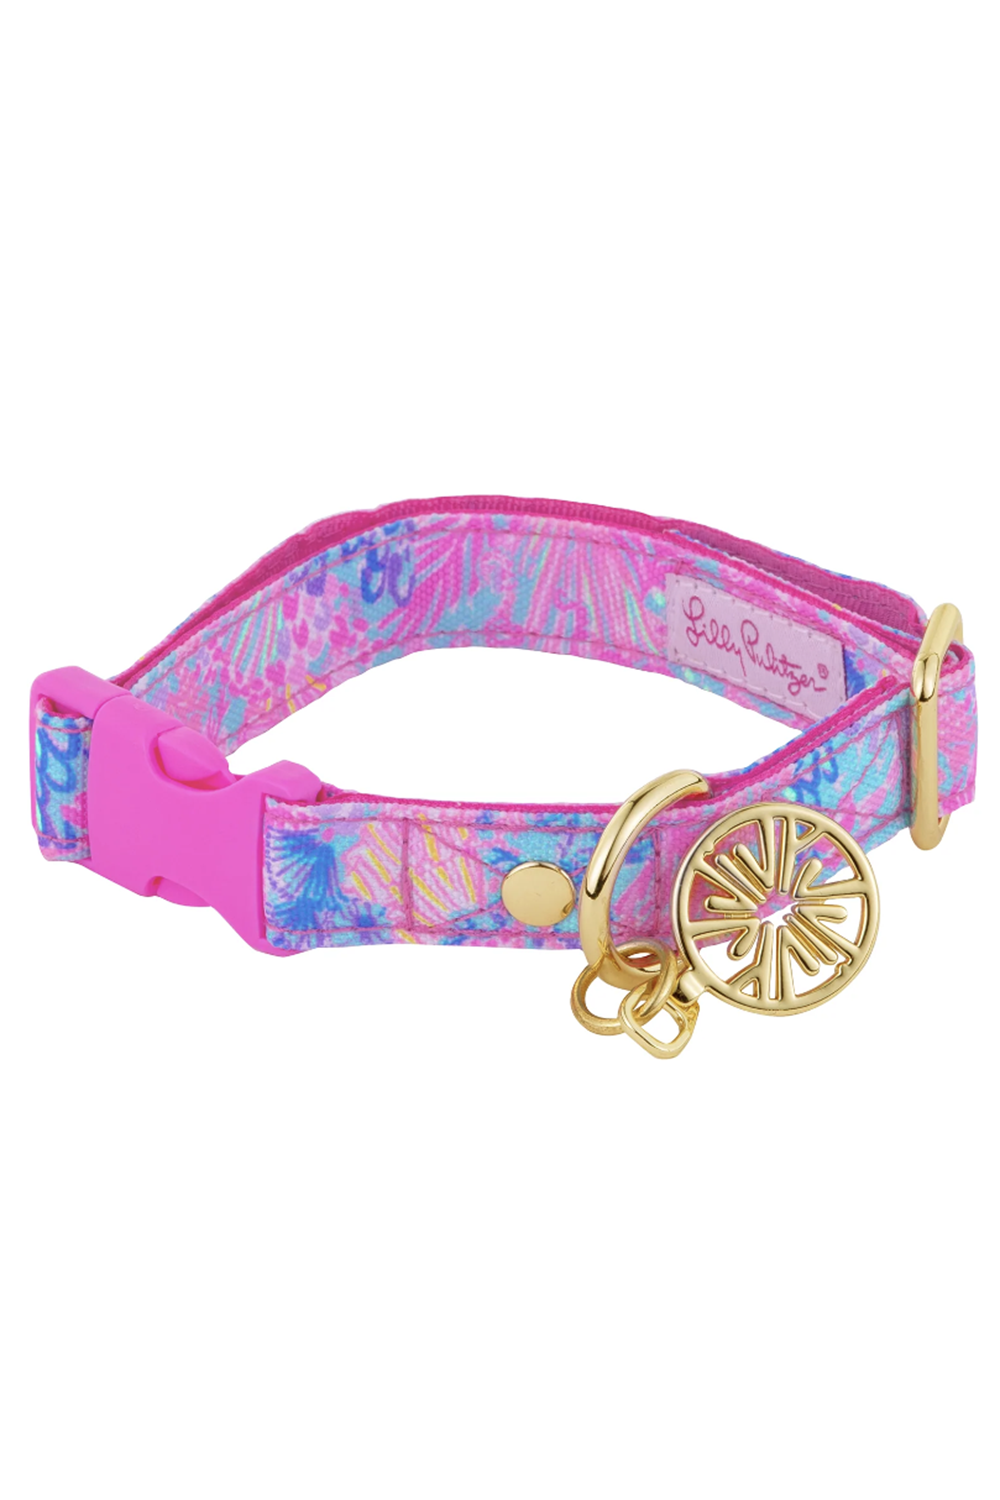 Lilly Pulitzer Dog Collar - Splendor in the Sand